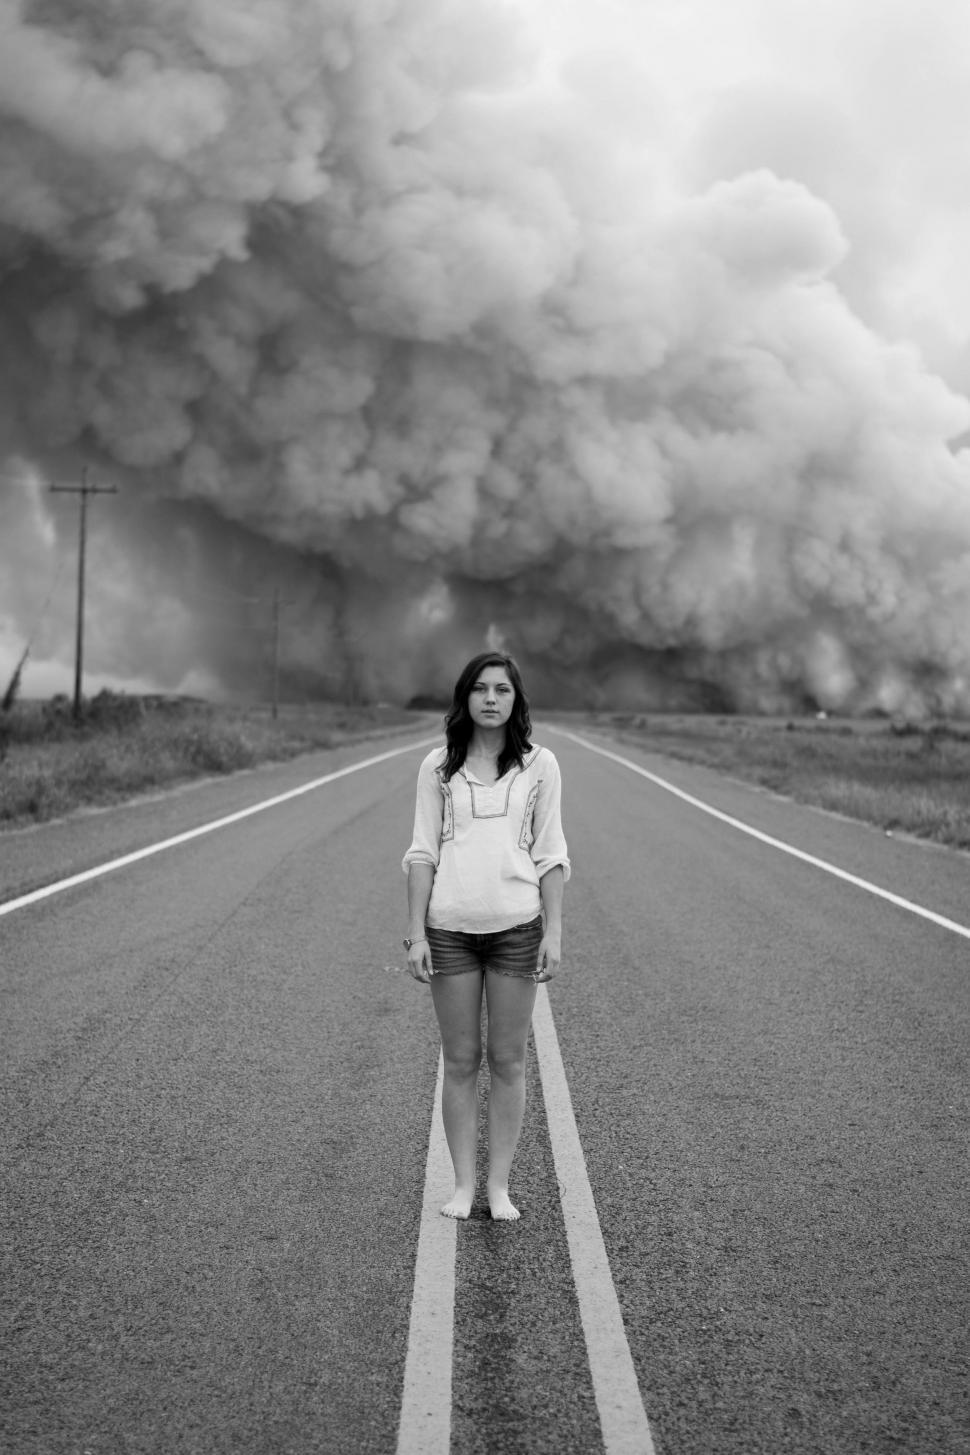 Free Image of Woman Standing in Middle of Road 